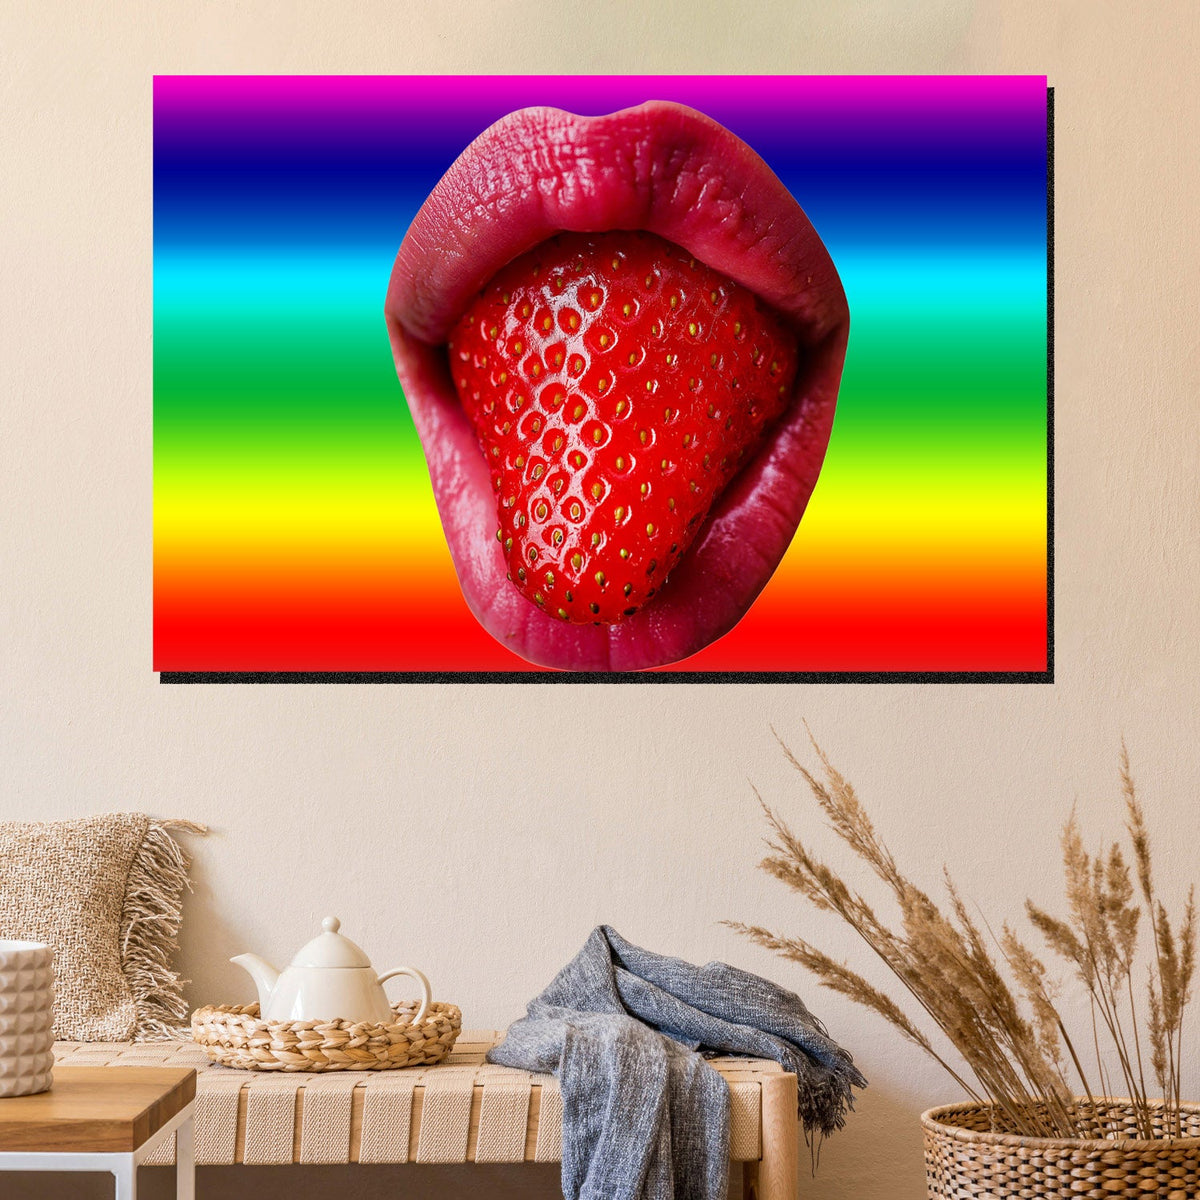 https://cdn.shopify.com/s/files/1/0387/9986/8044/products/MouthfulofStrawberryCanvasArtprintStretched-3.jpg